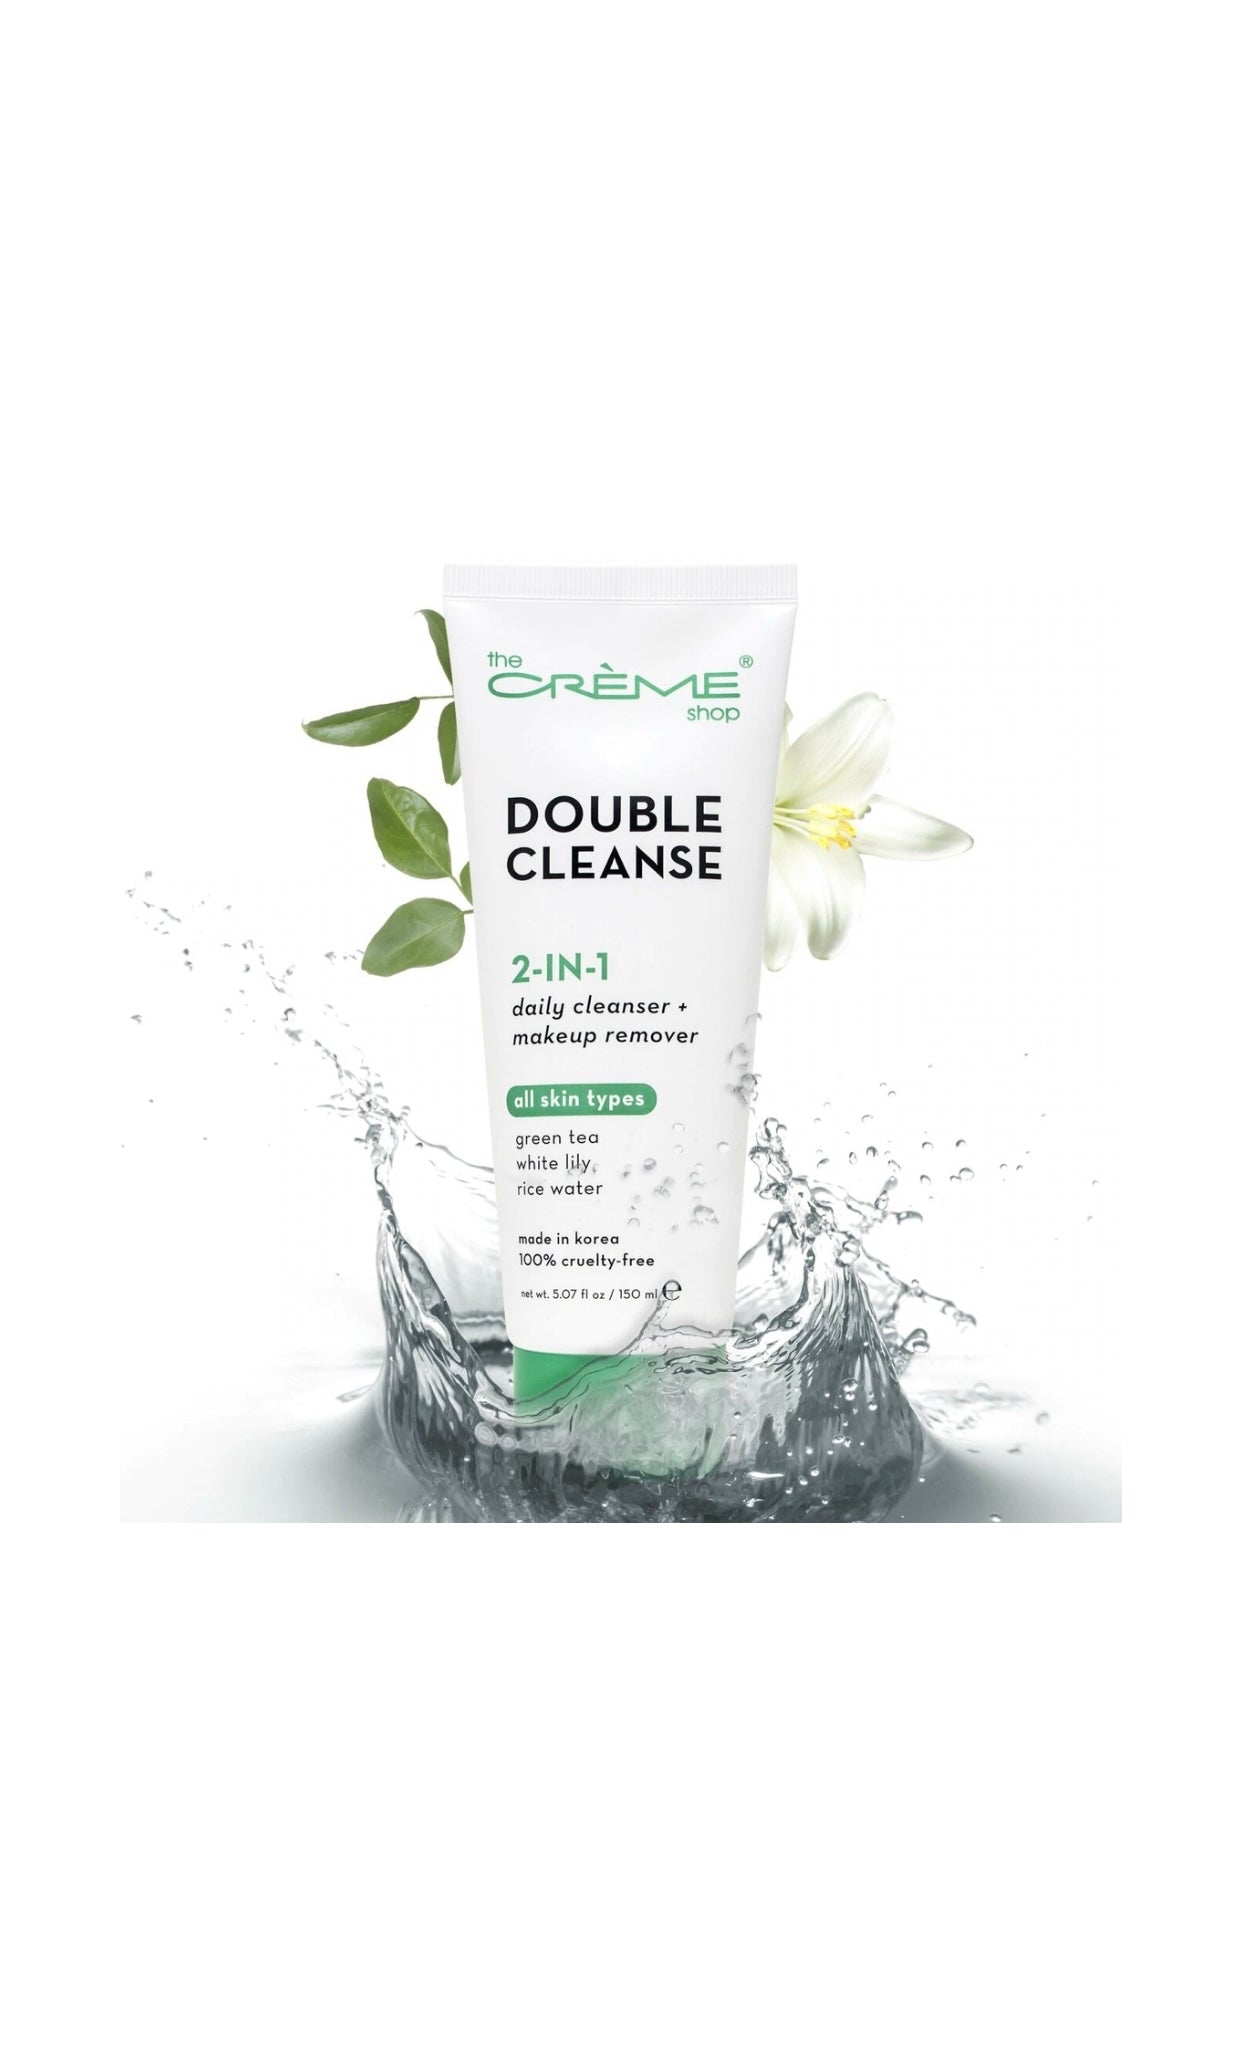 Double Cleanse daily  2- IN- 1 cleanser + makeup remover